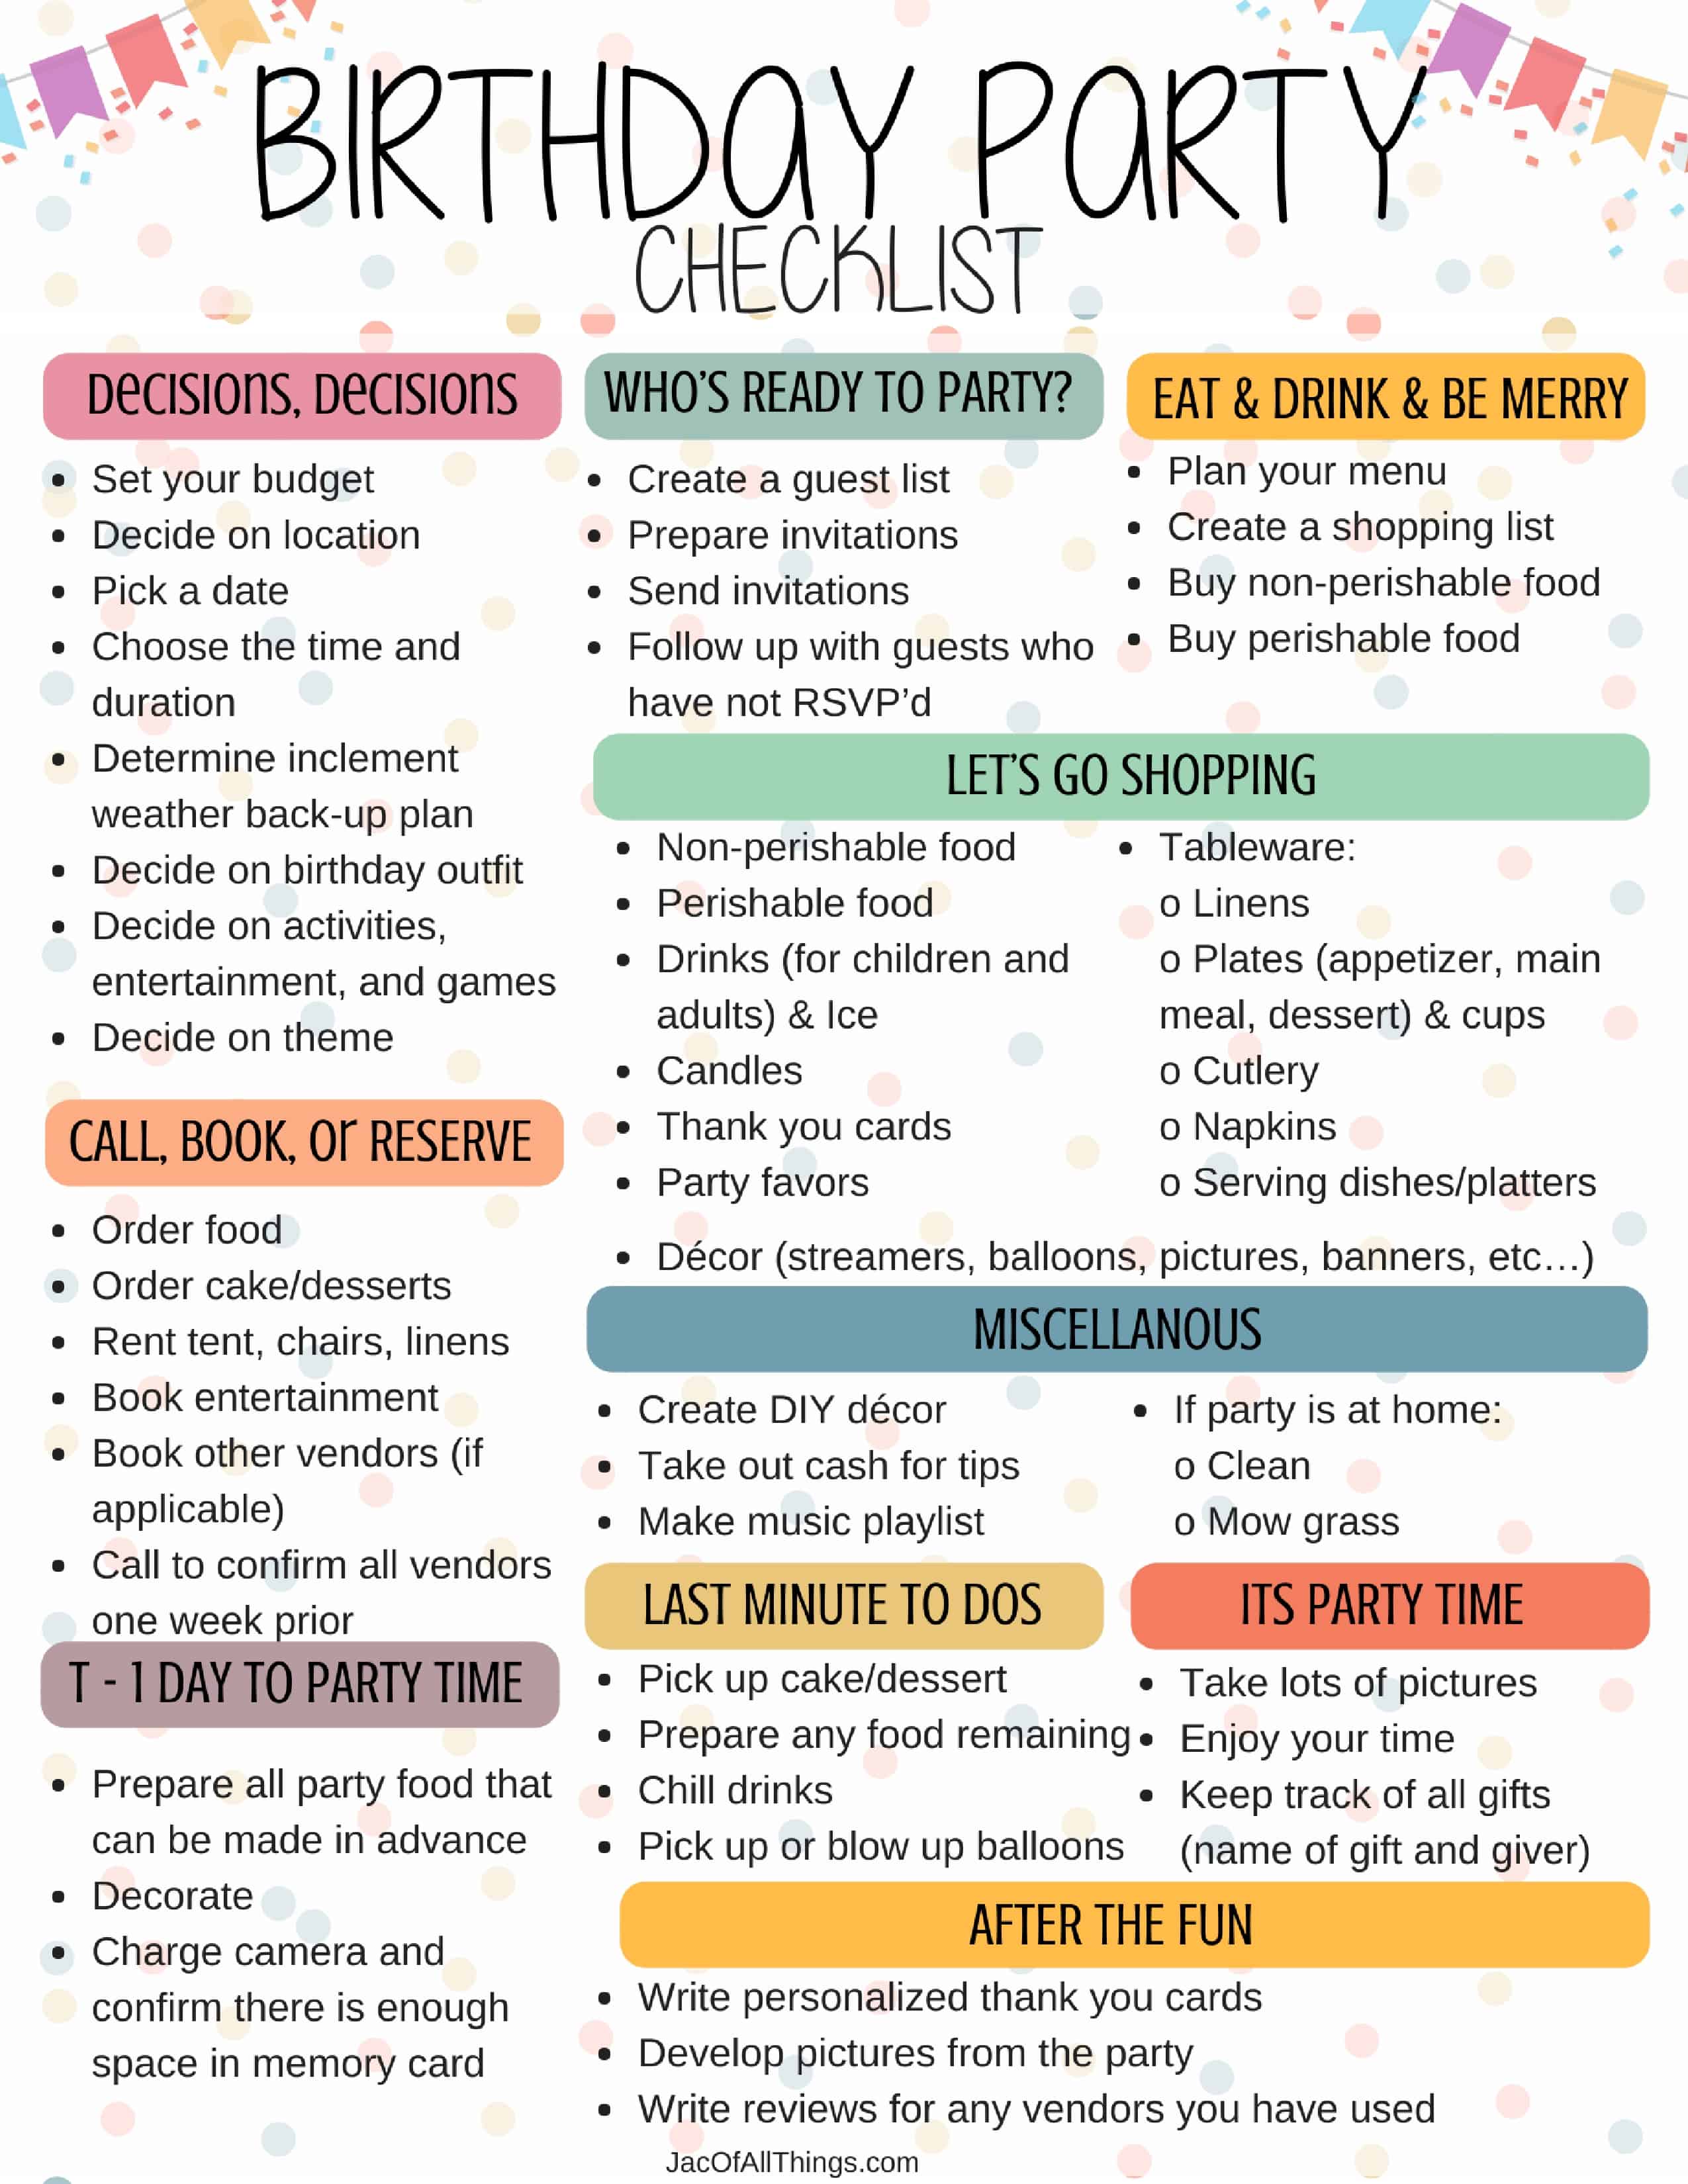 Birthday Party Checklist Jac Of All Things